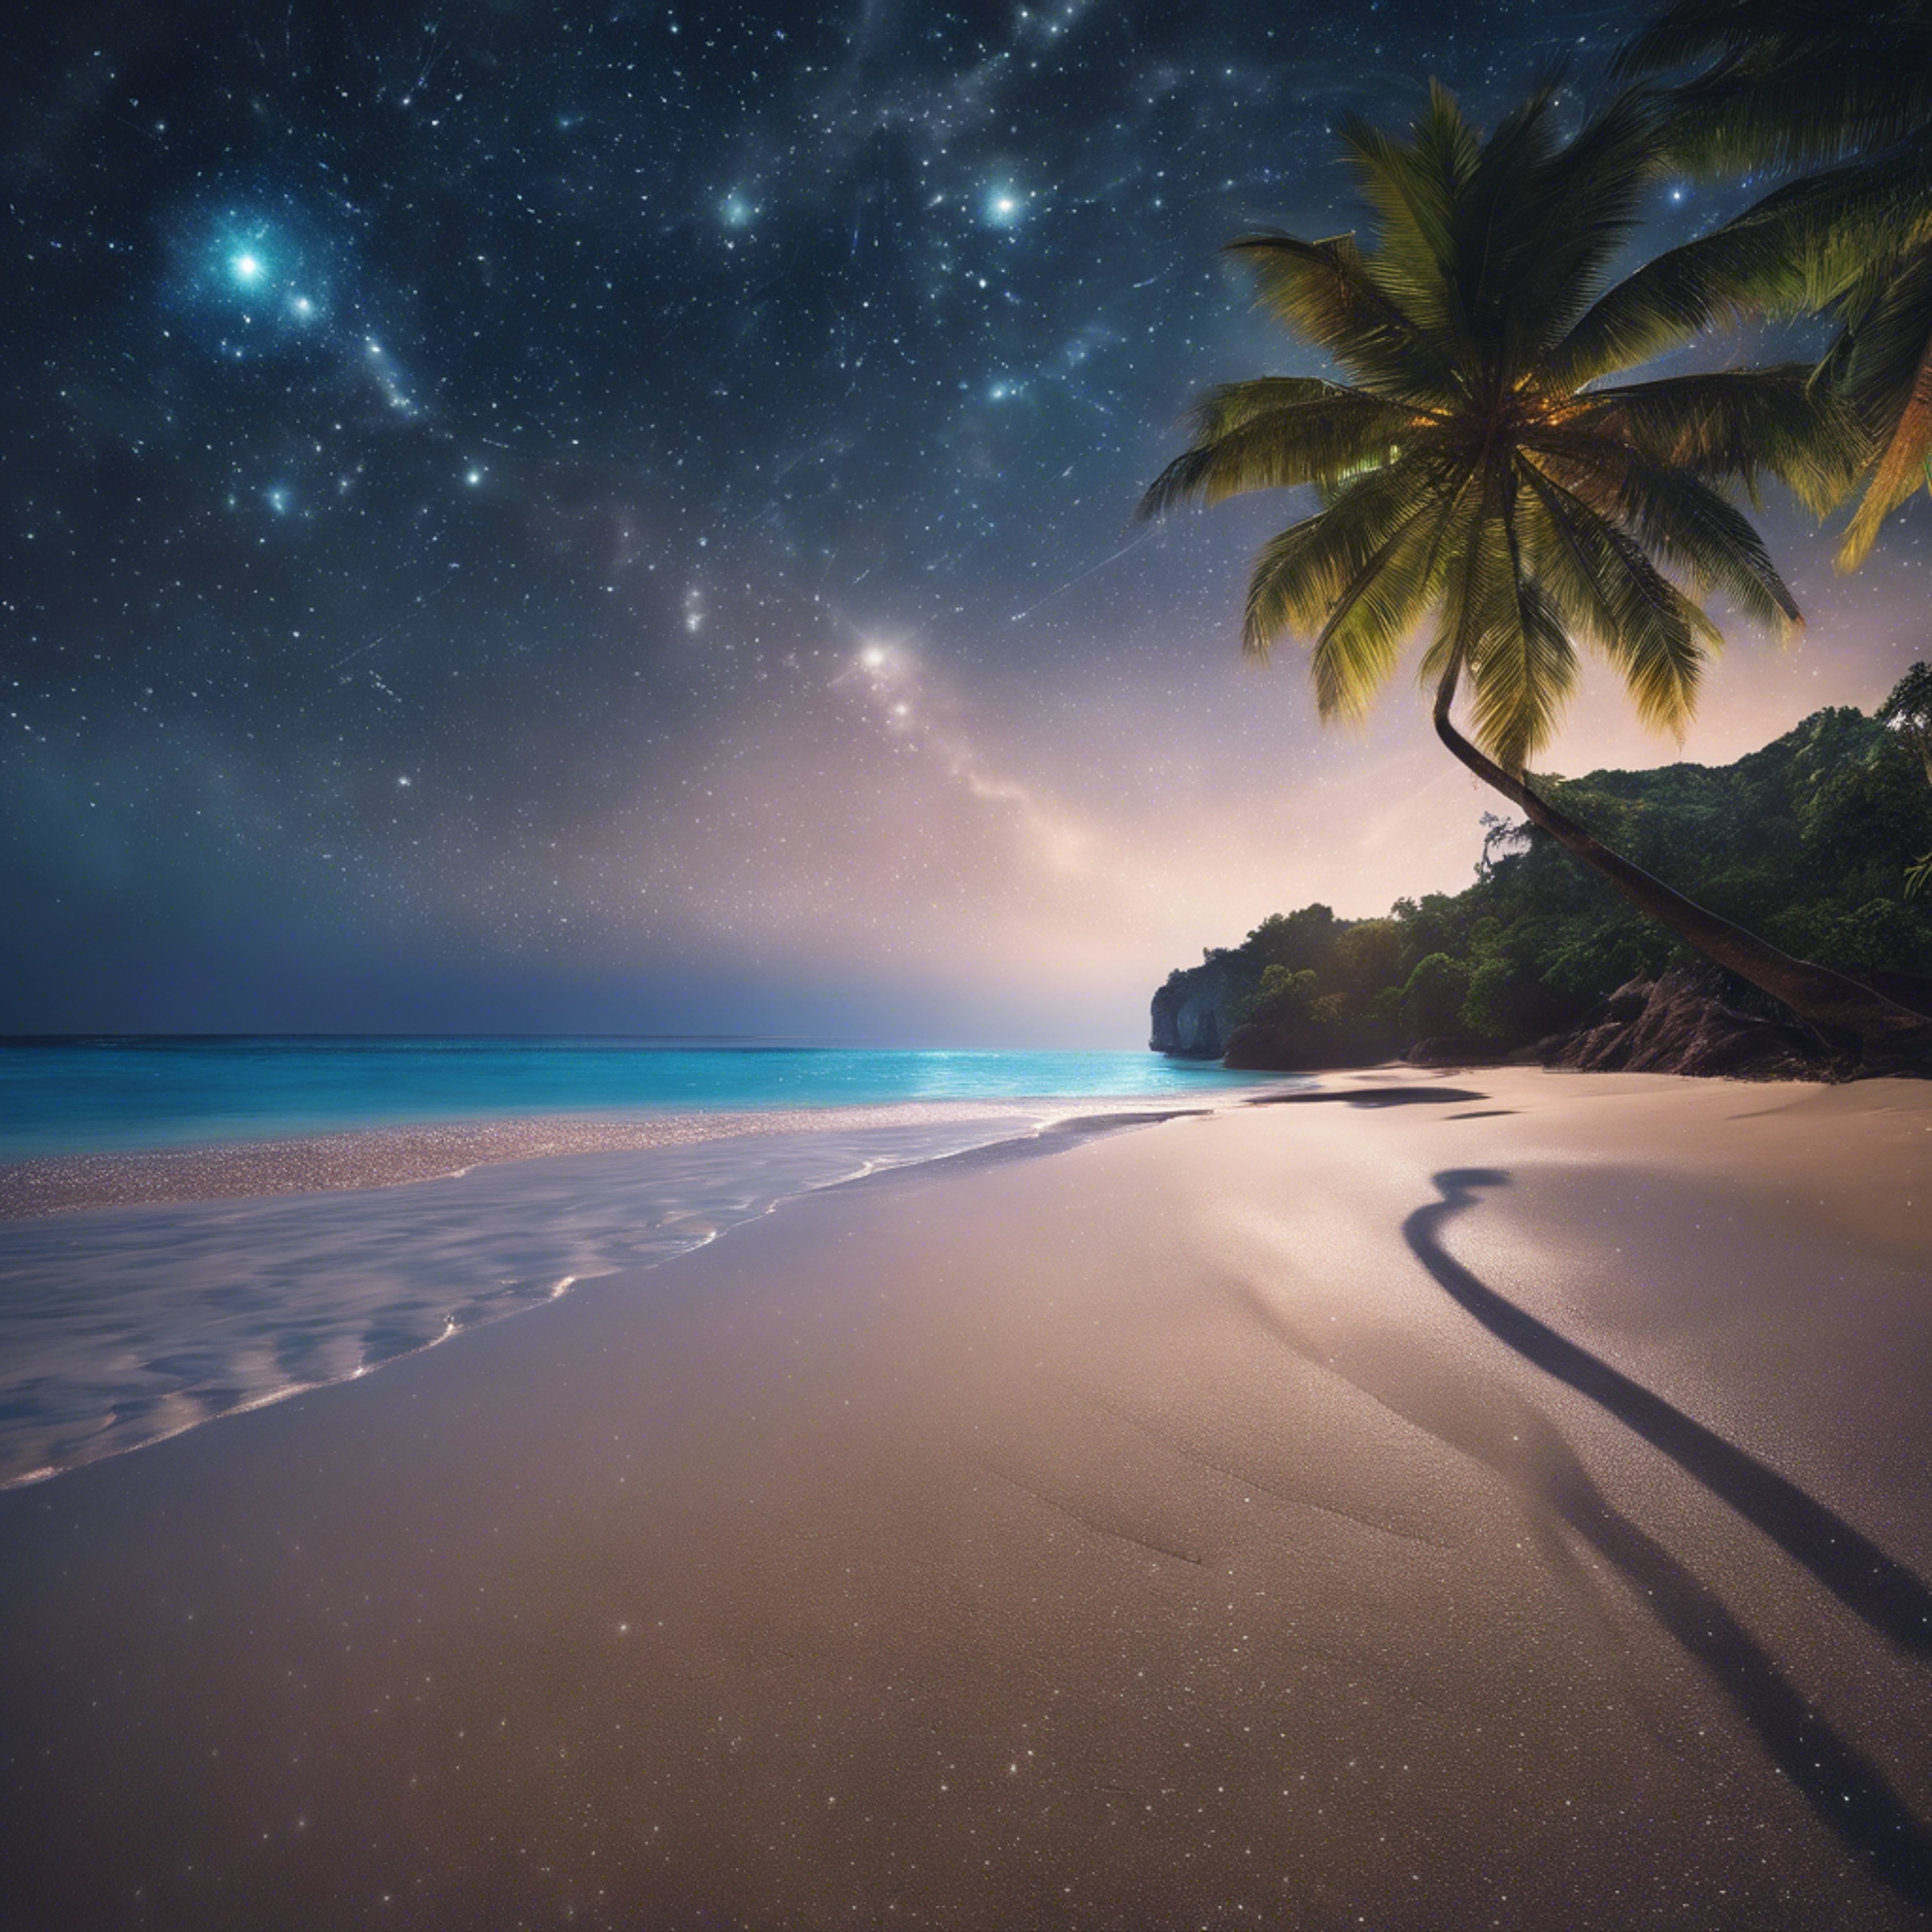 Gleaming stars encrusted in the night sky above a tranquil tropical beach. Wallpaper[e4d213f7e6244d2f8918]